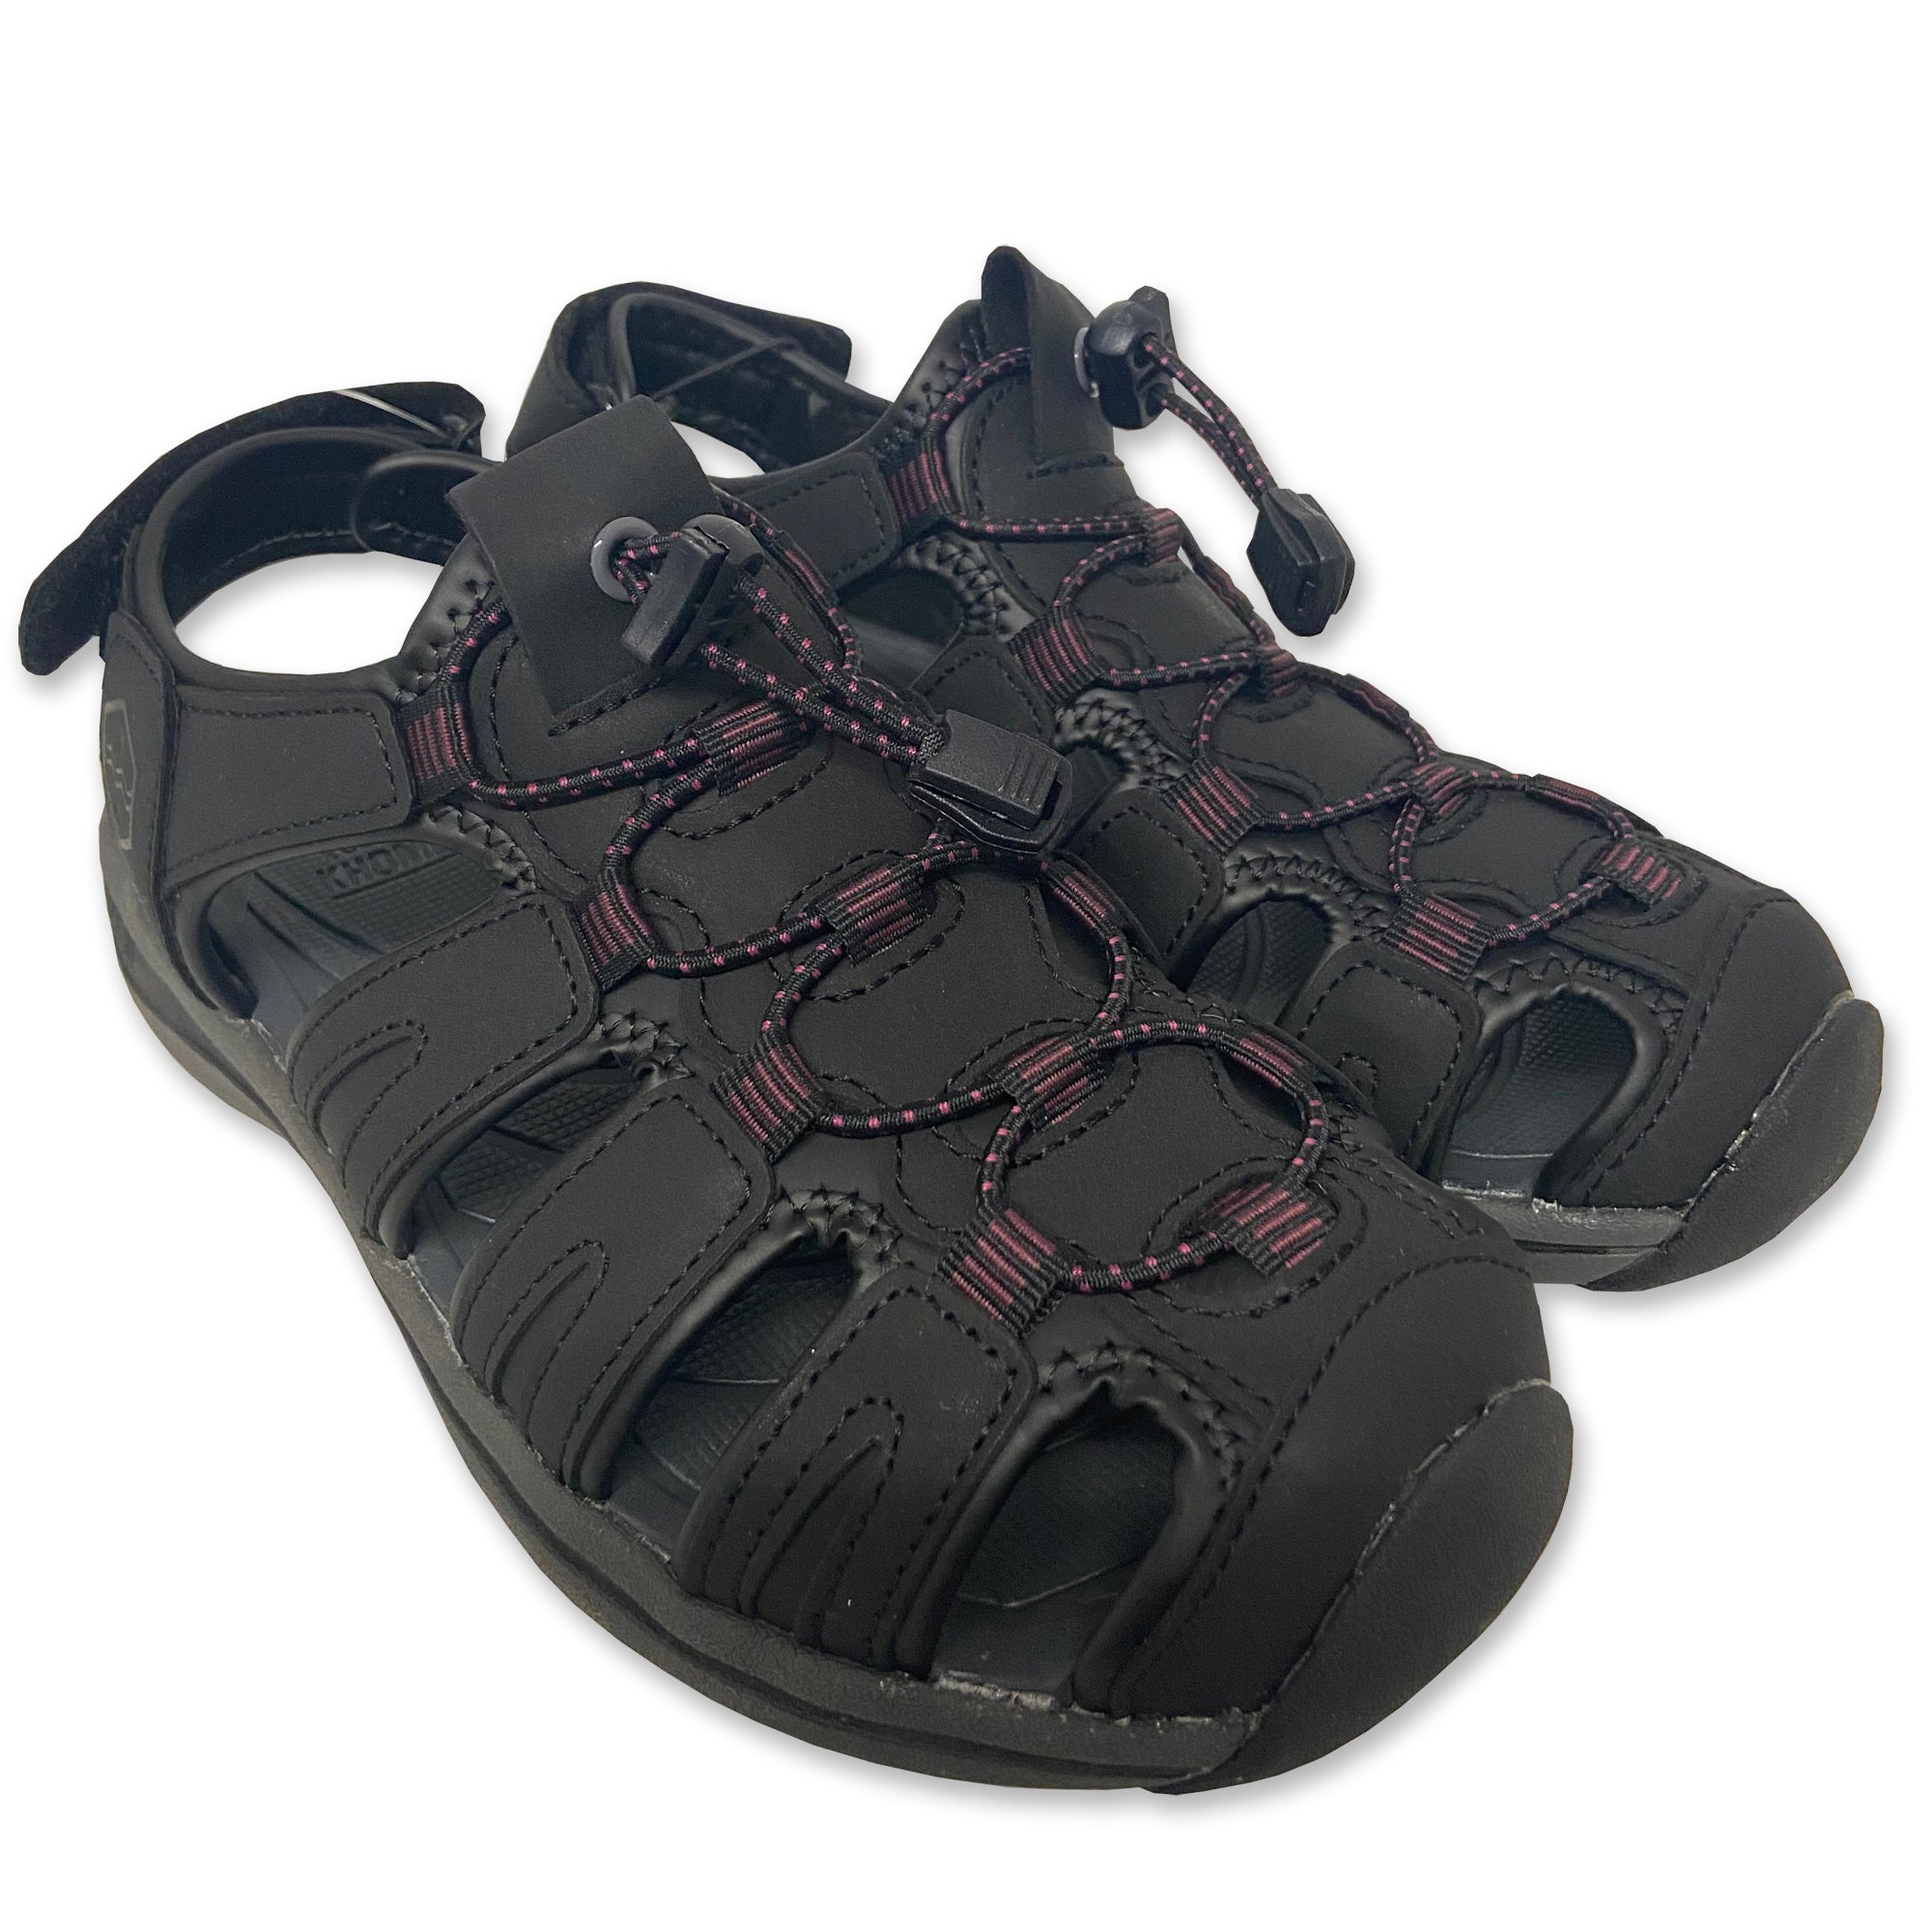 Buy Comfortable Sandals for Women, Stylish Ladies Sandals at Best Price |  Walkway